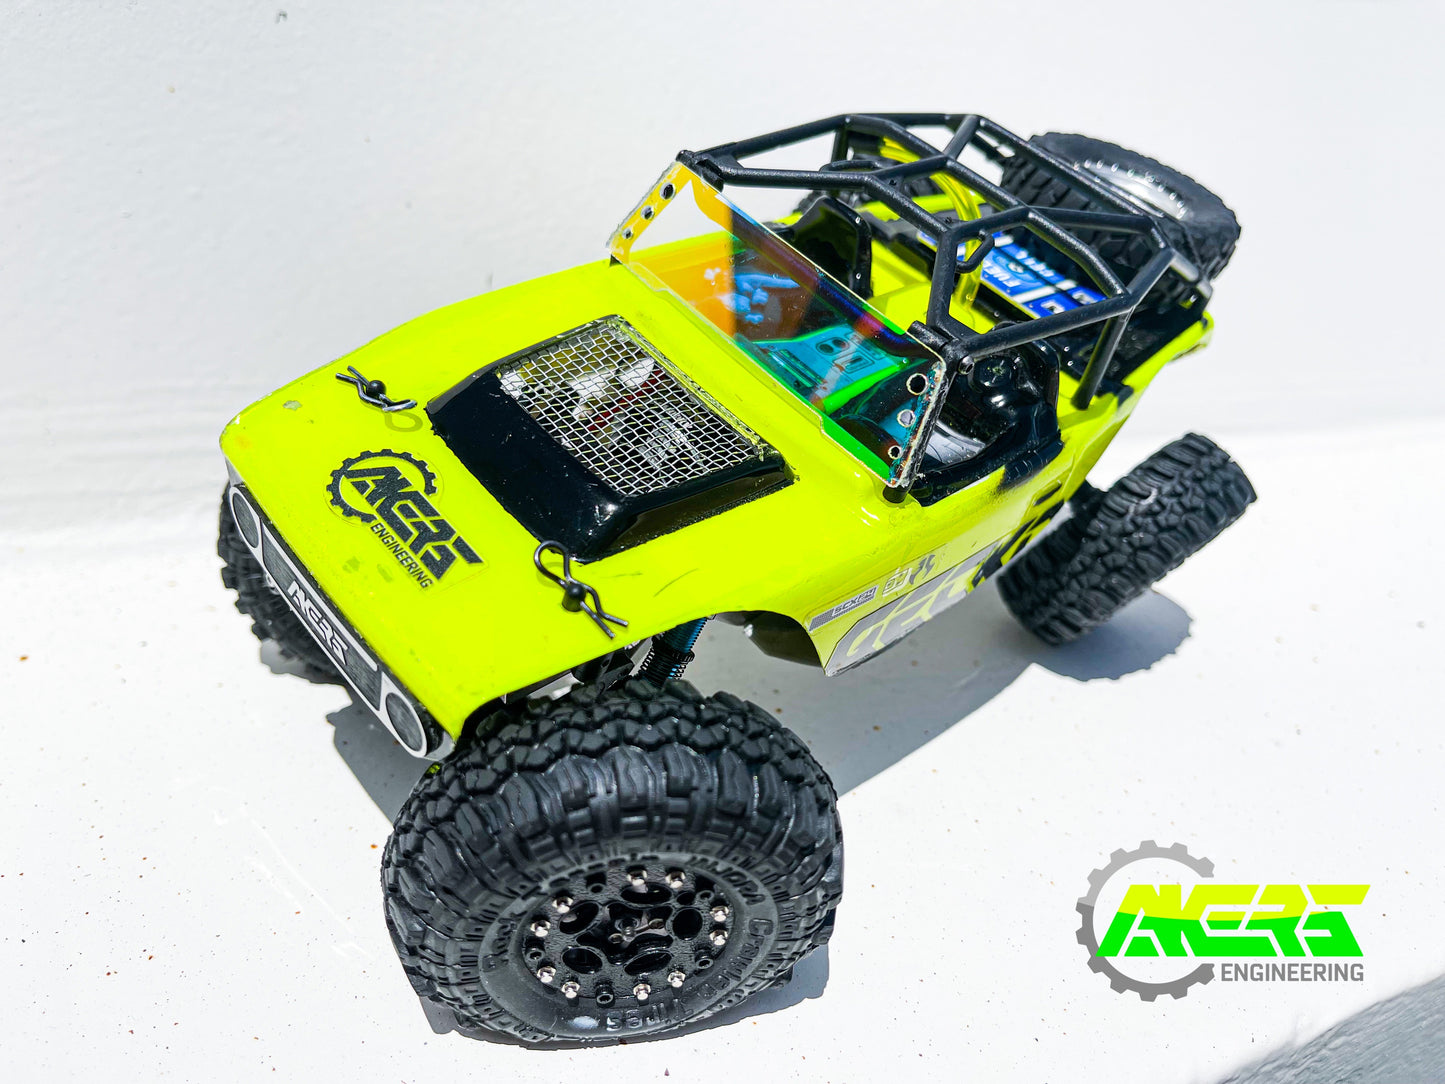 GECKO24 (SCX24 LCG Chassis)